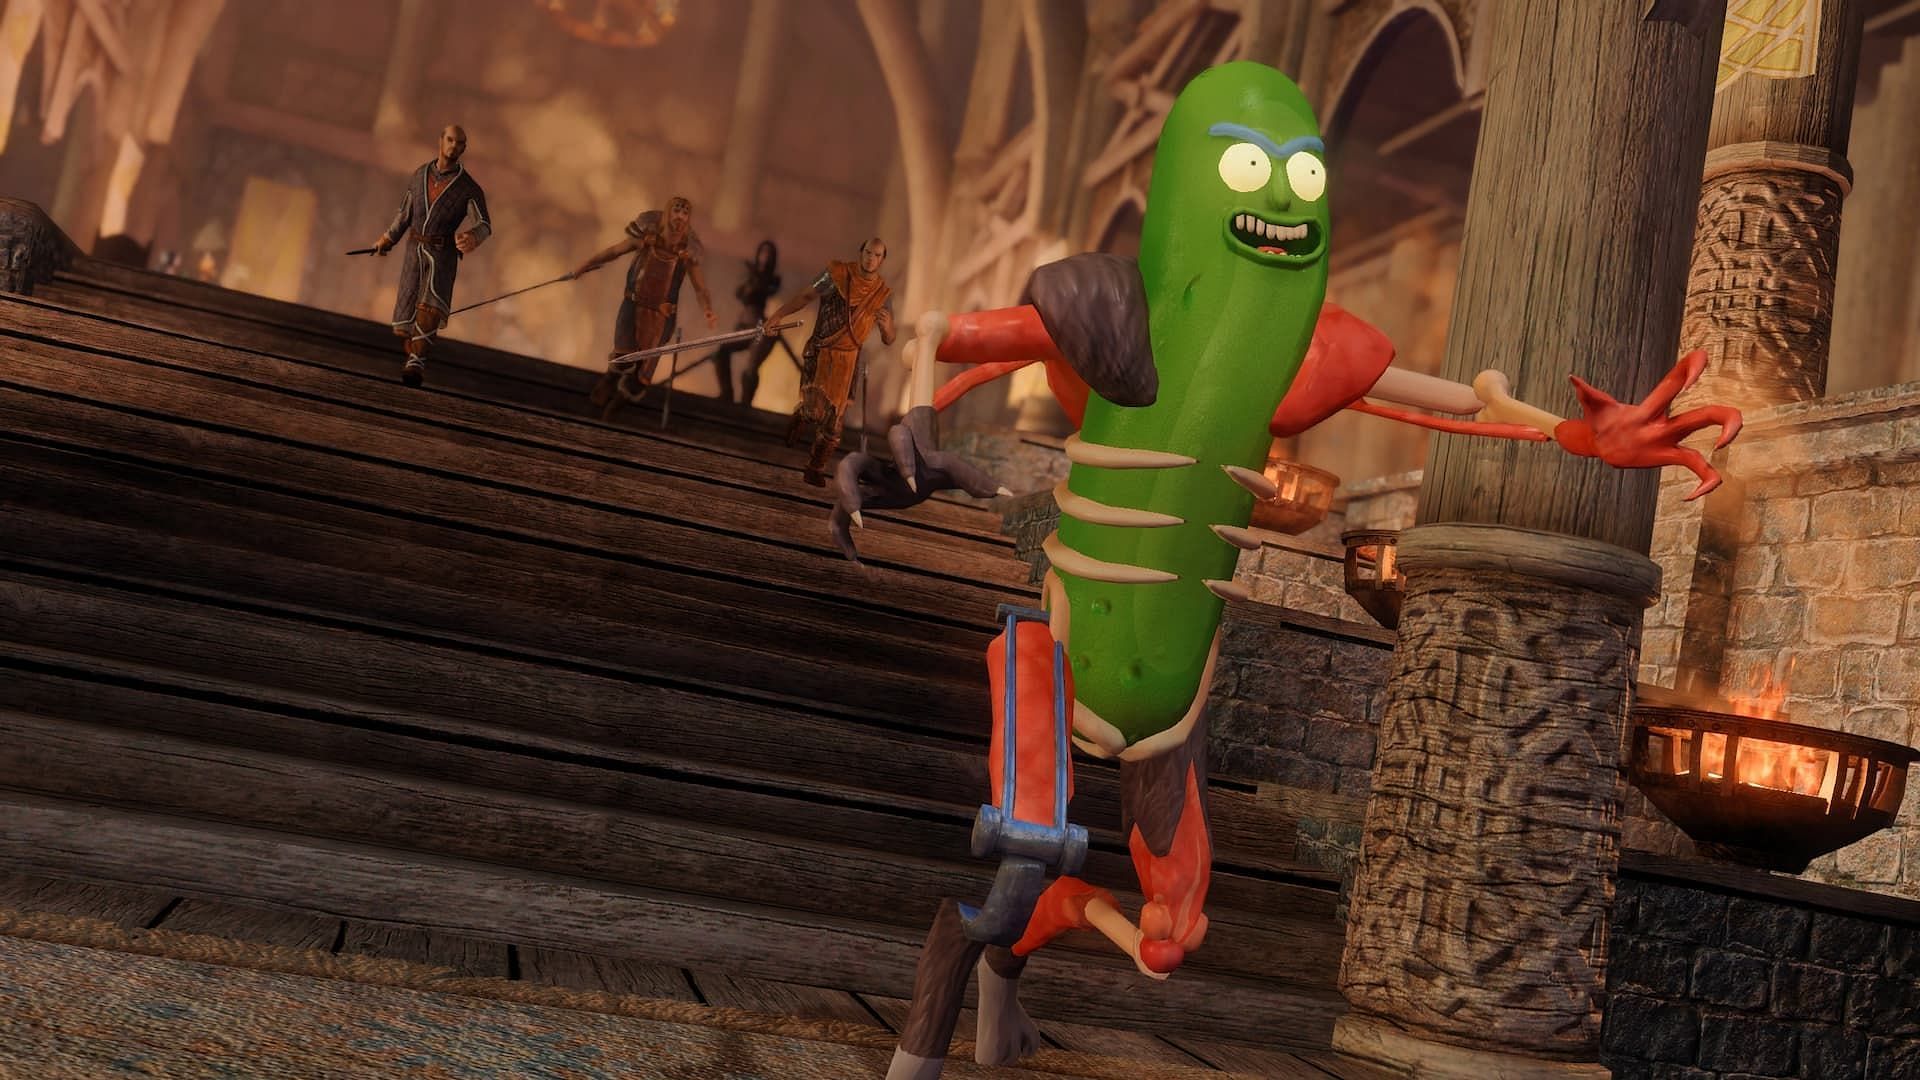 Players can play as Pickle Rick using mods in Skyrim (Image via Nexus Mods website)